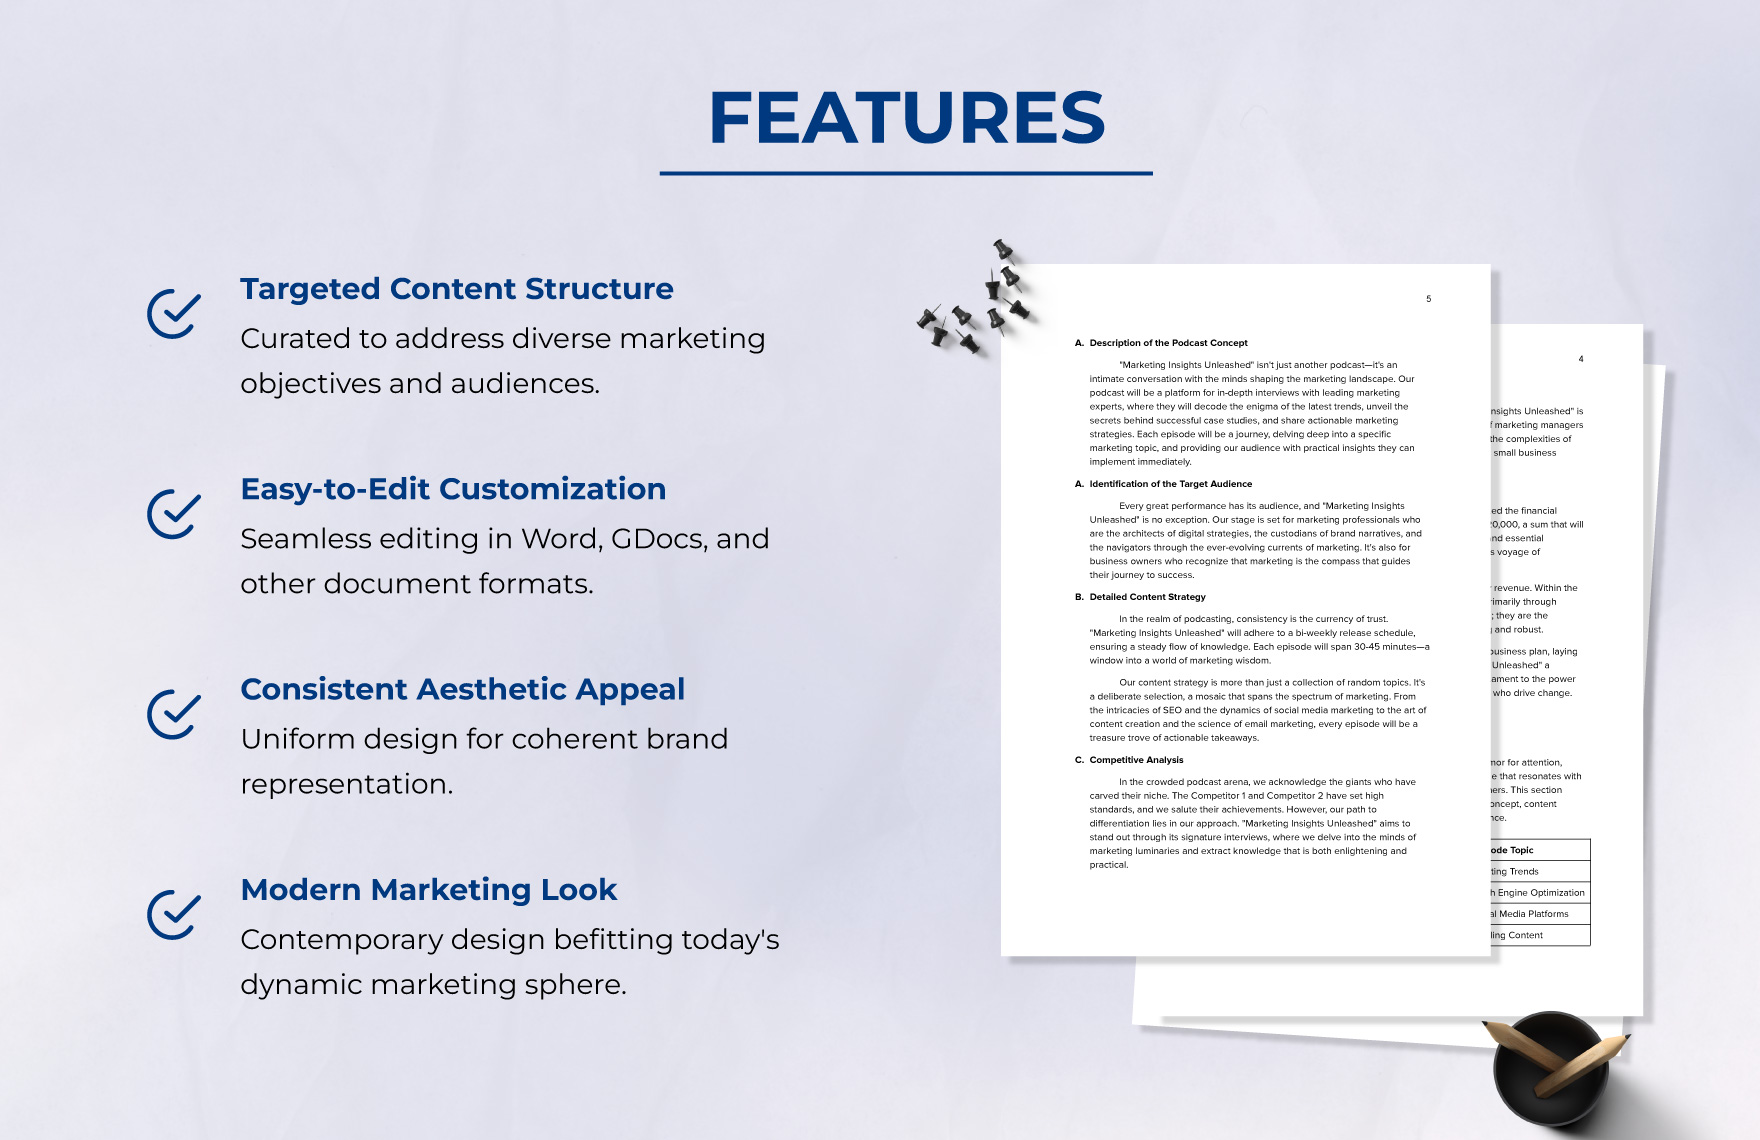 Marketing Podcast Strategy Business Plan Template